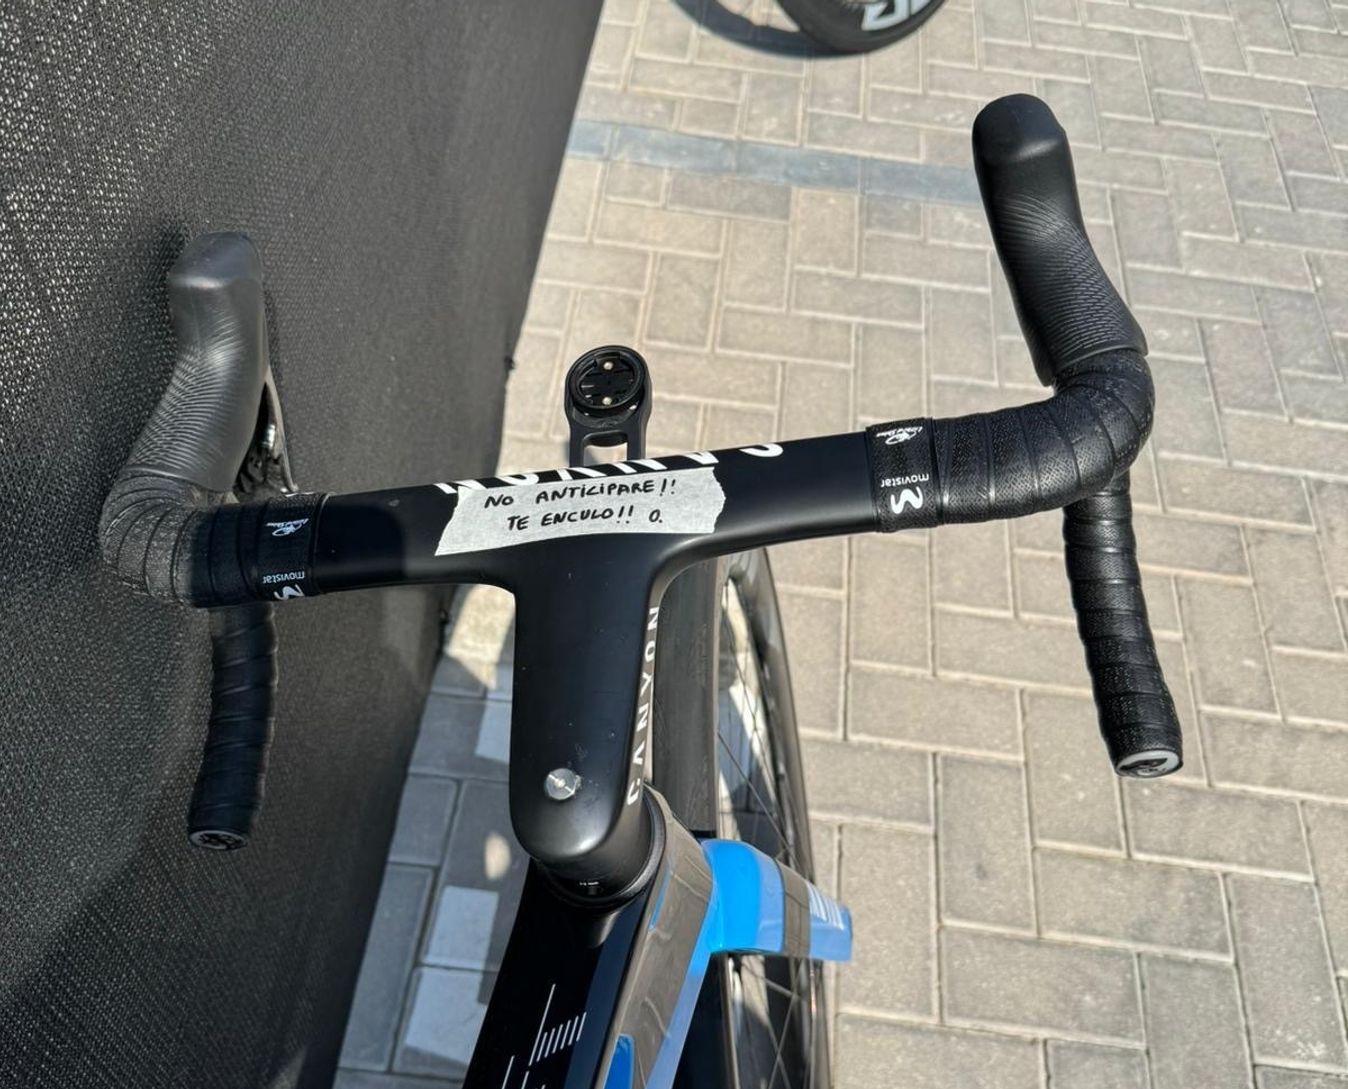 Gaviria has some choice words of encouragement adorning his one-piece cockpit 